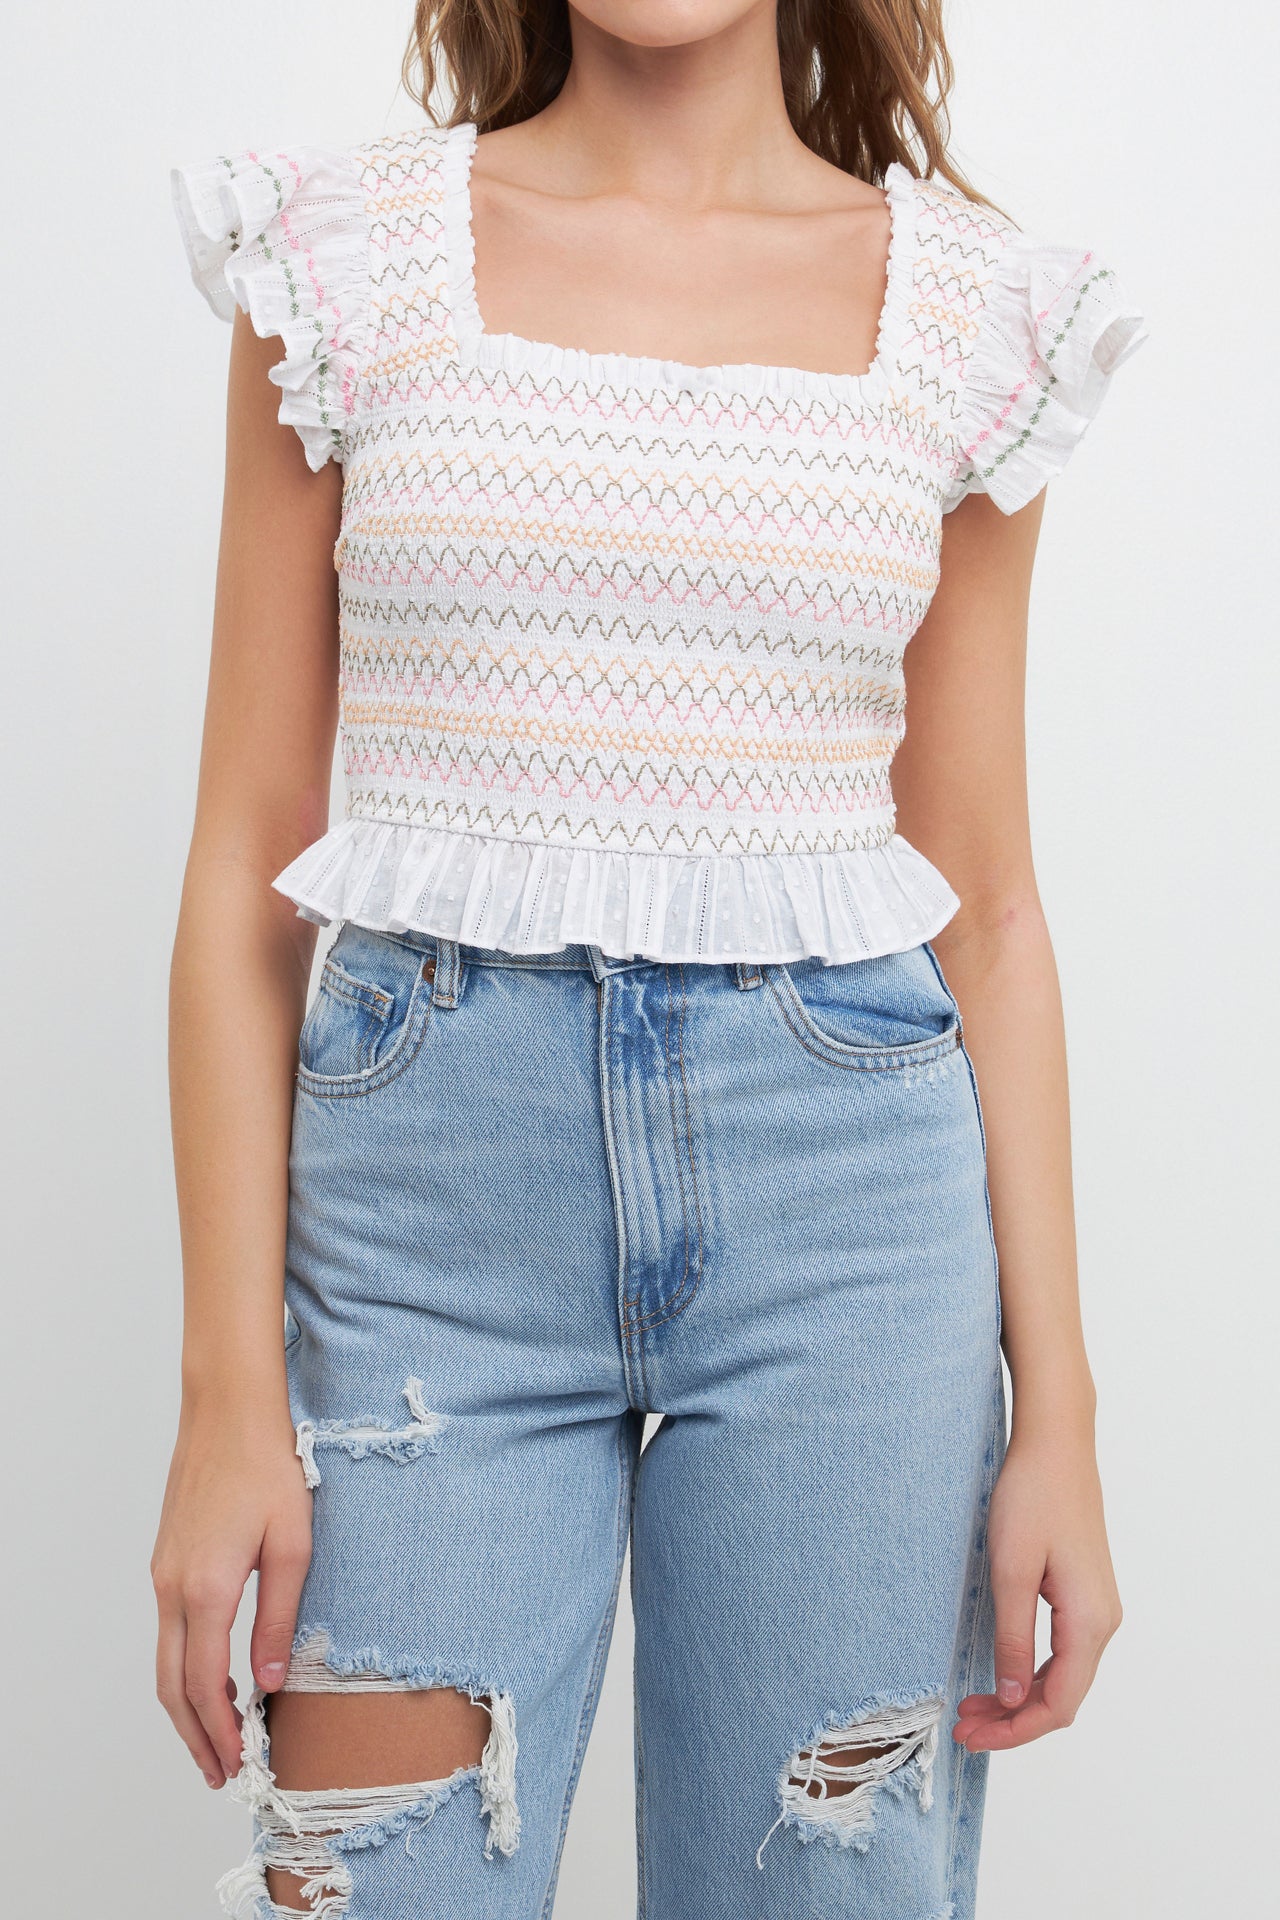 FREE THE ROSES - Smocked Multi Color Embroidered Crop Top - TOPS available at Objectrare